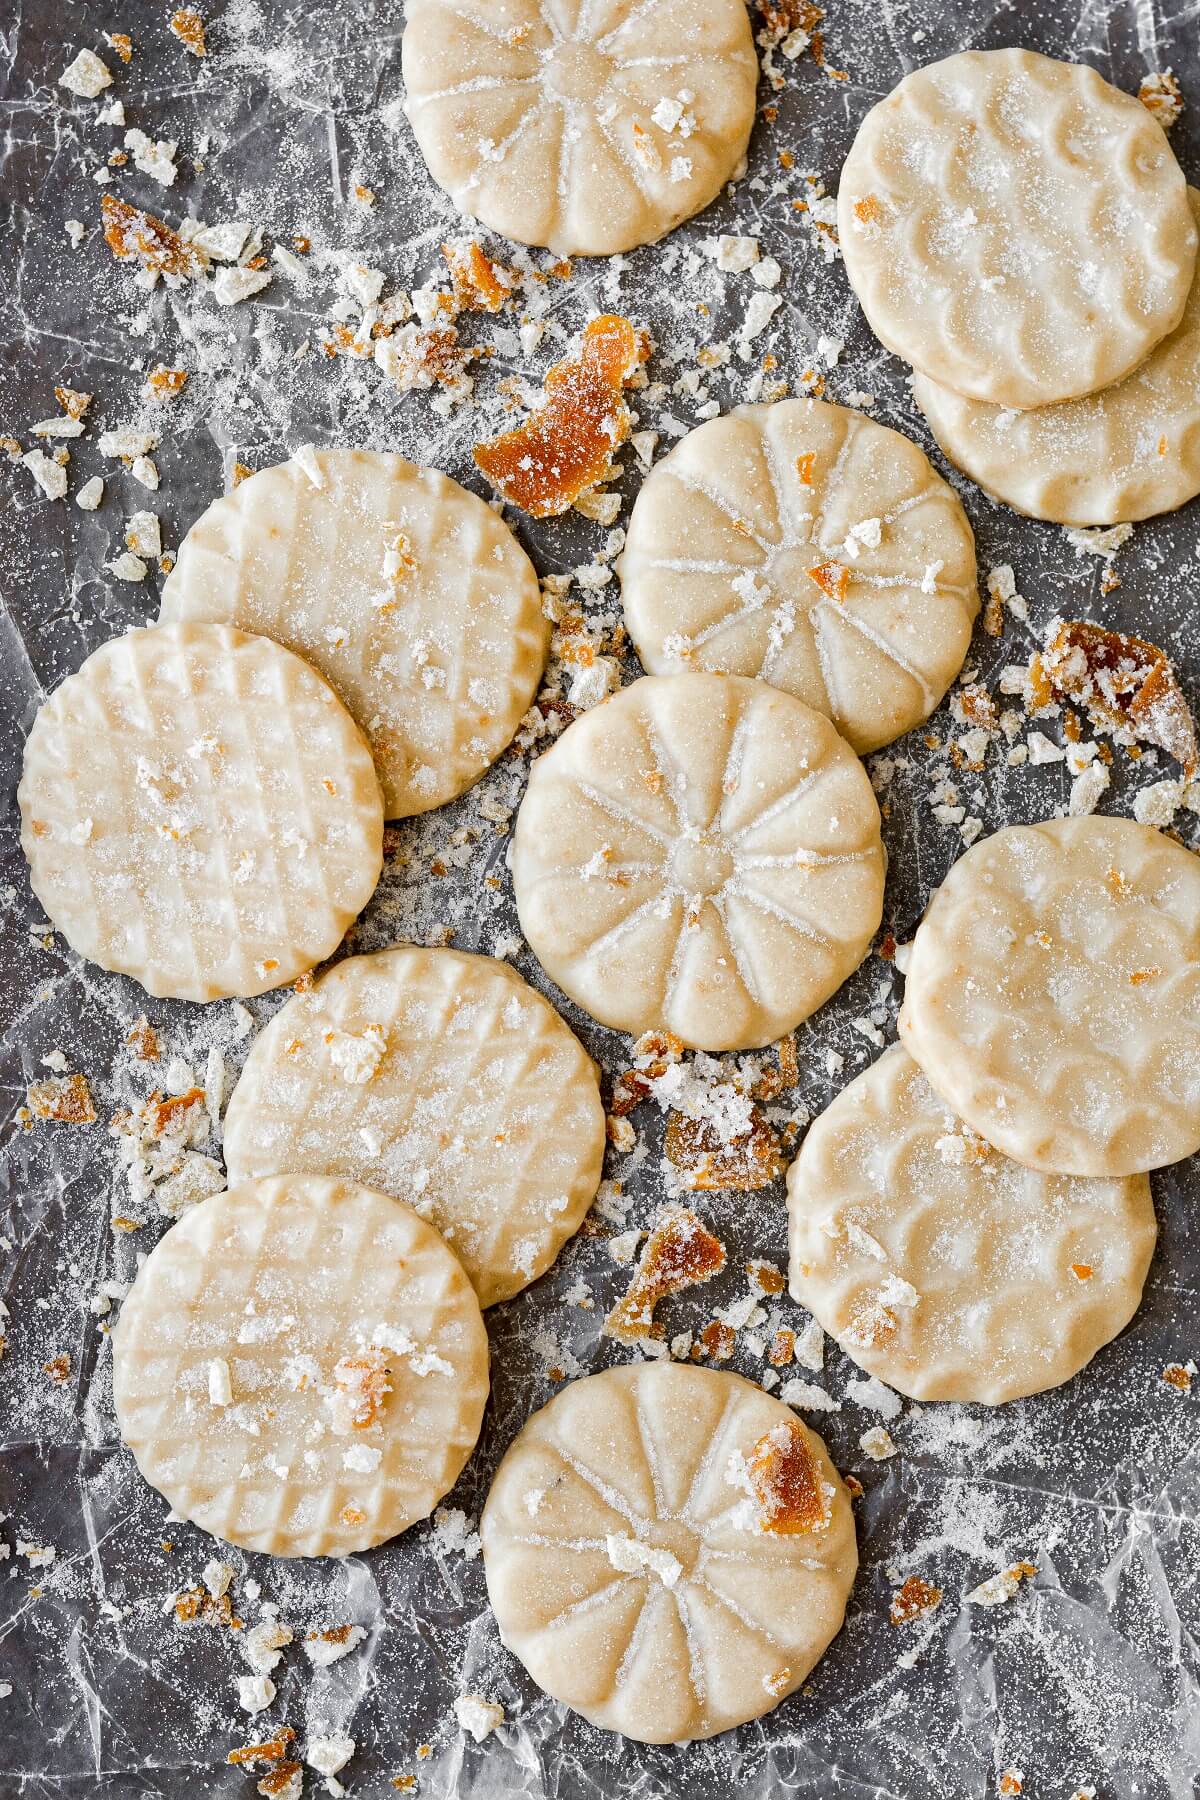 Ginger shortbread cookies with orange icing, scattered on a baking sheet.